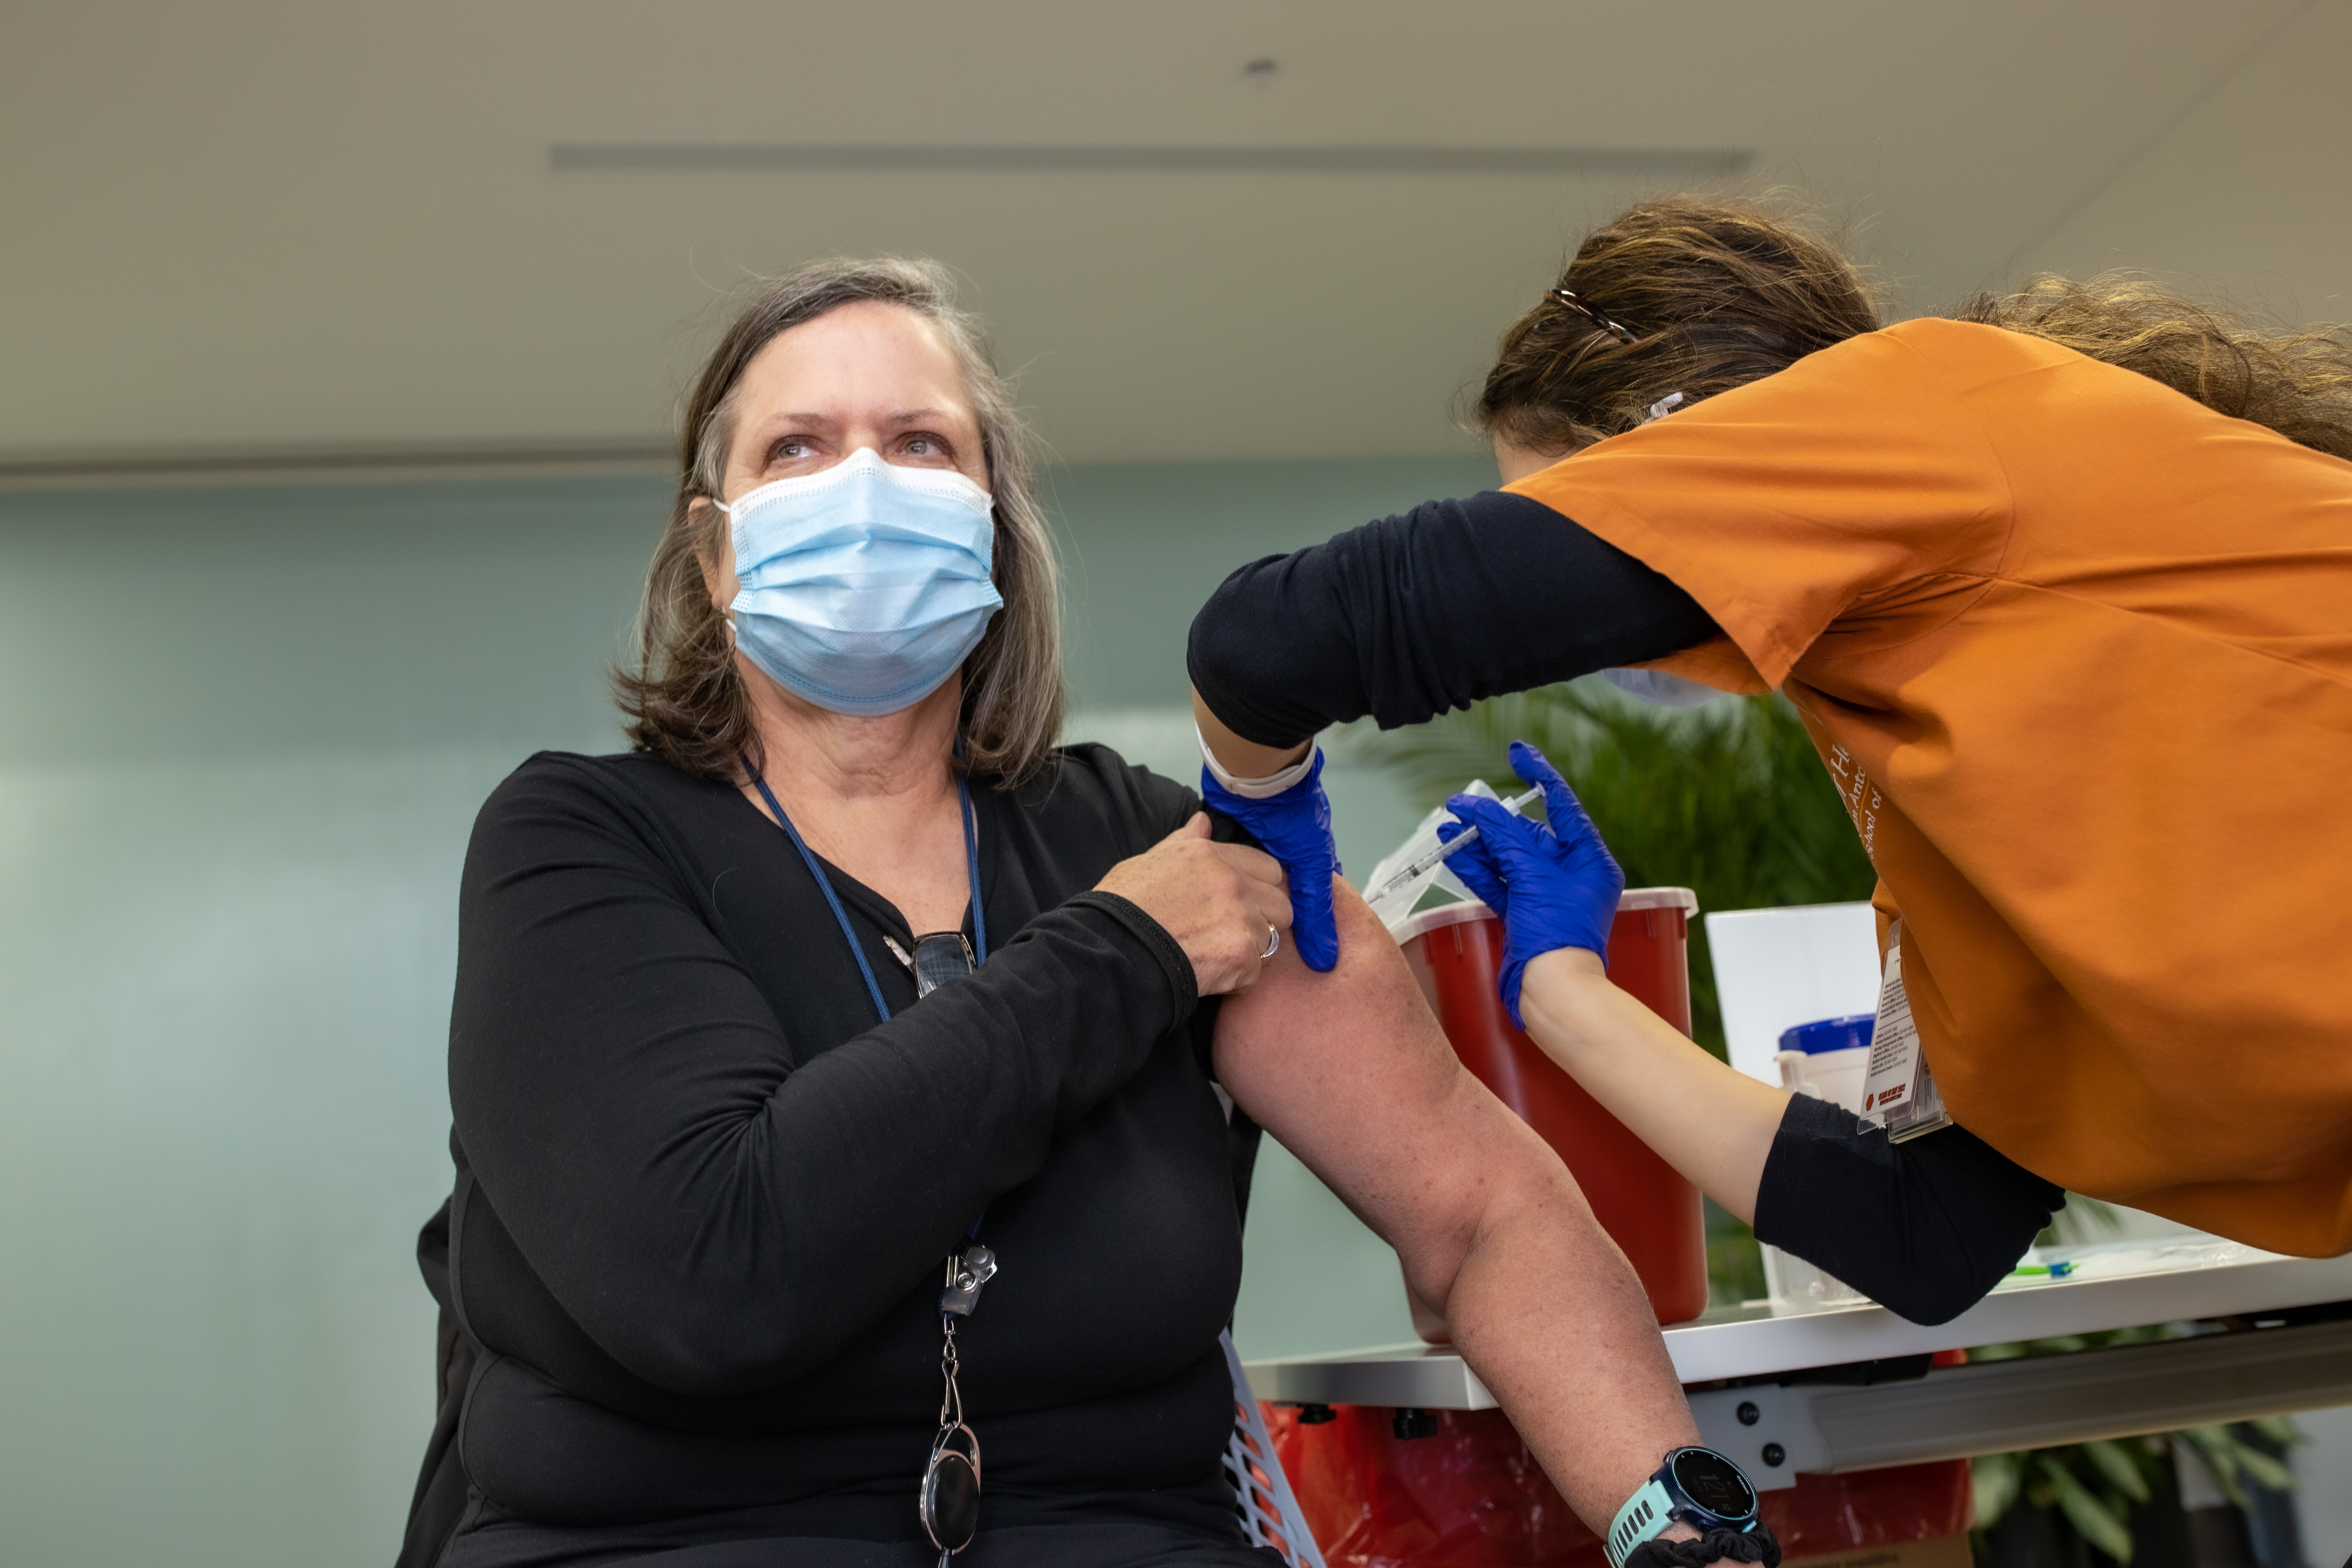 Dr. Jan Patterson, Professor of Internal Medicine (Infectious Diseases) and Pathology and Associate Dean for Quality & Lifelong Learning receives the Pfizer COVID-19 vaccine. "Crying tears of joy for the beginning of the end of this terrible pandemic," she said after recieving the vaccine.